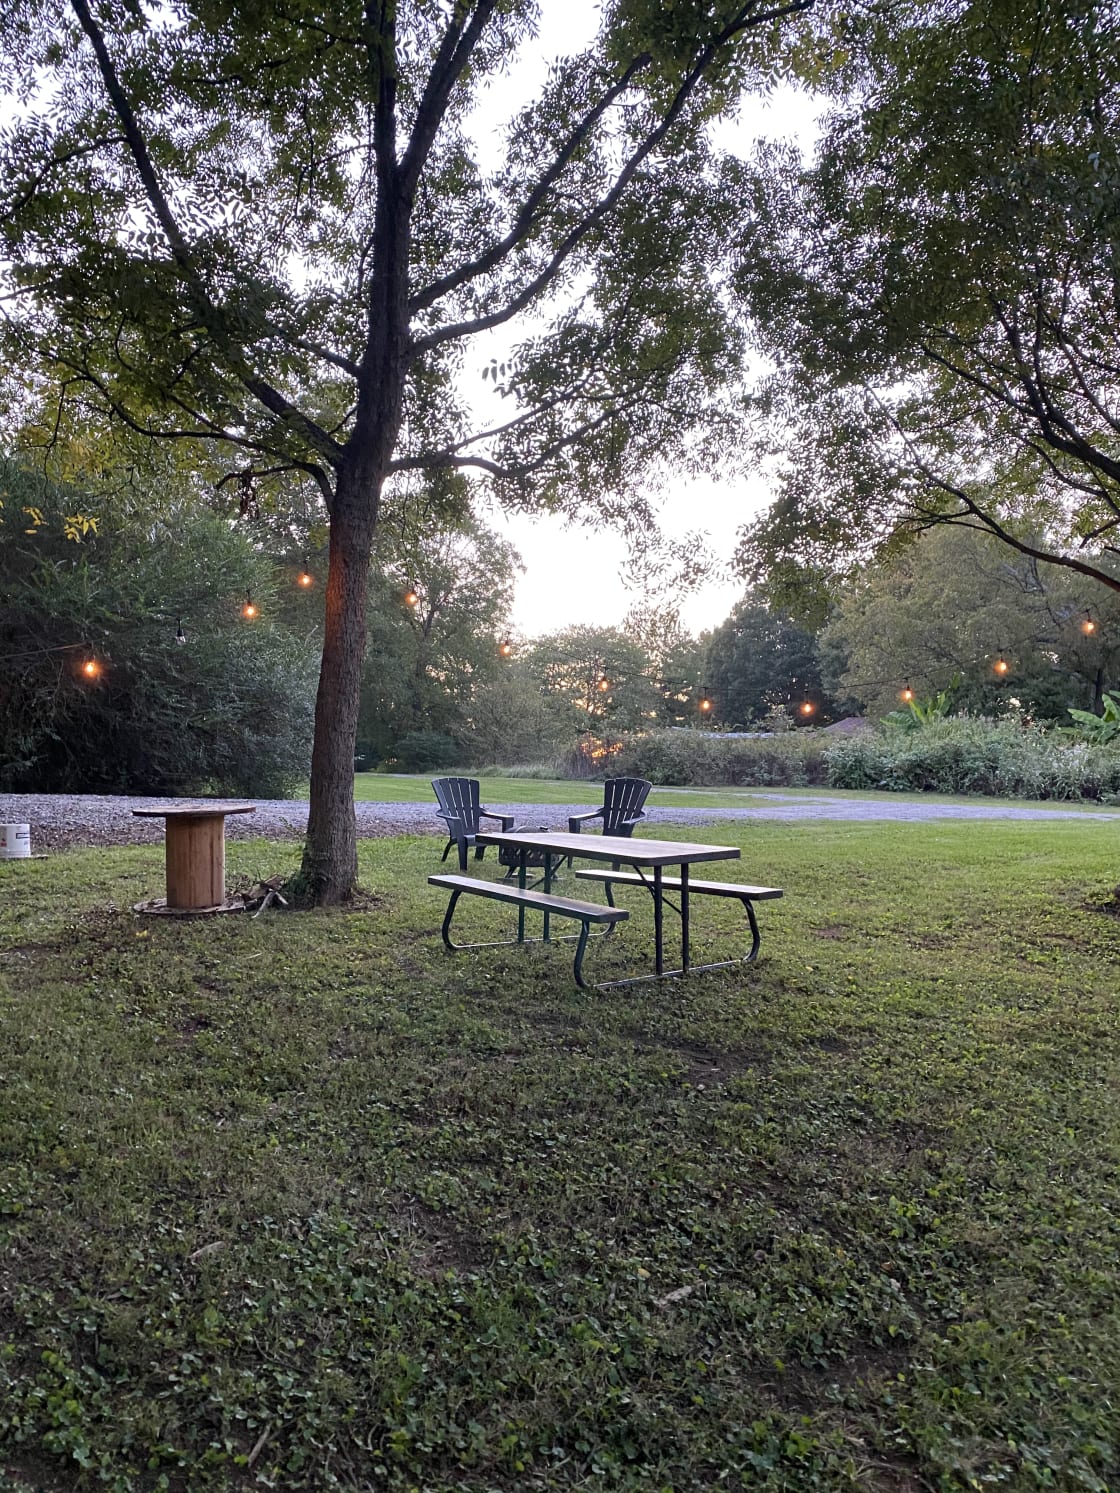 Site comes with lights, table, fire pit and chairs 